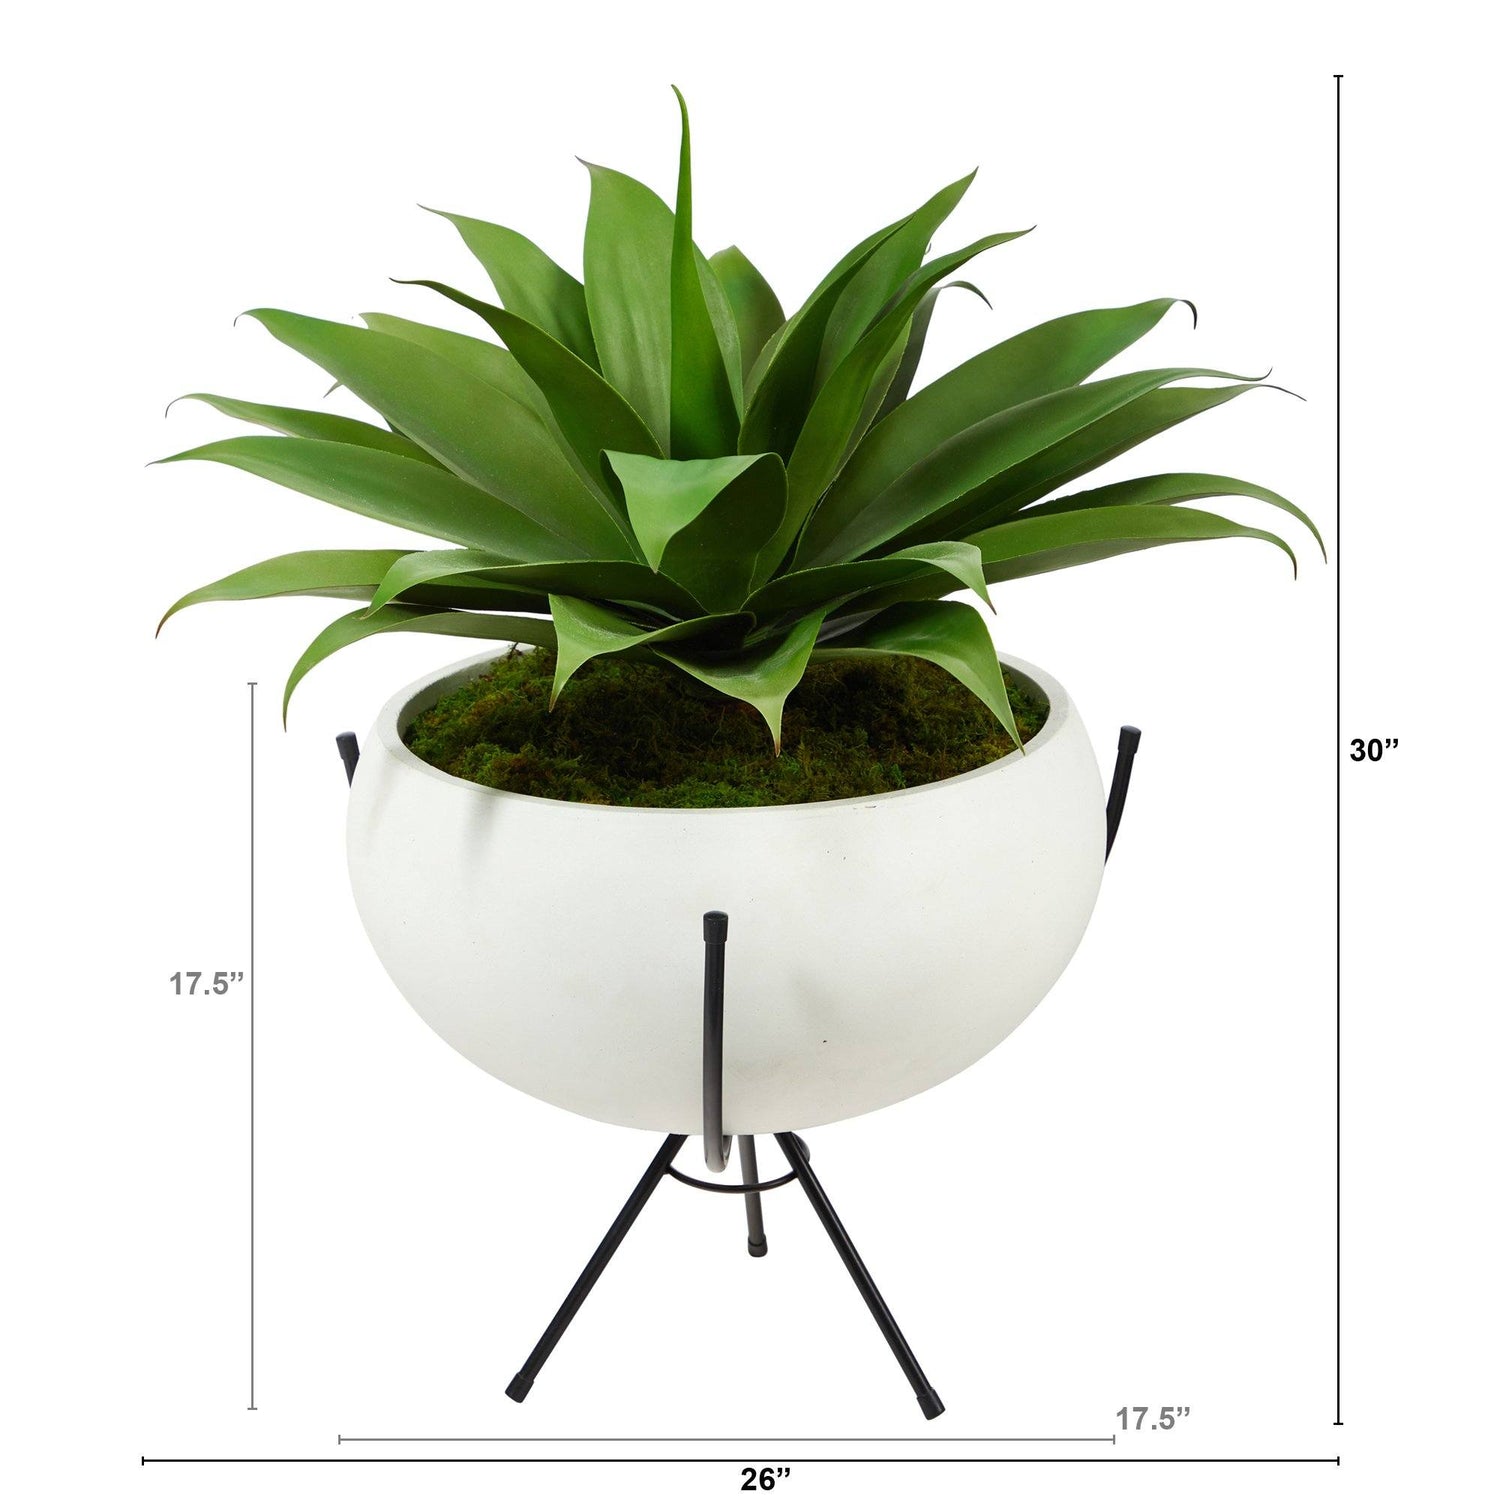 30” Agave Succulent Artificial Plant in White Planter with Metal Stand